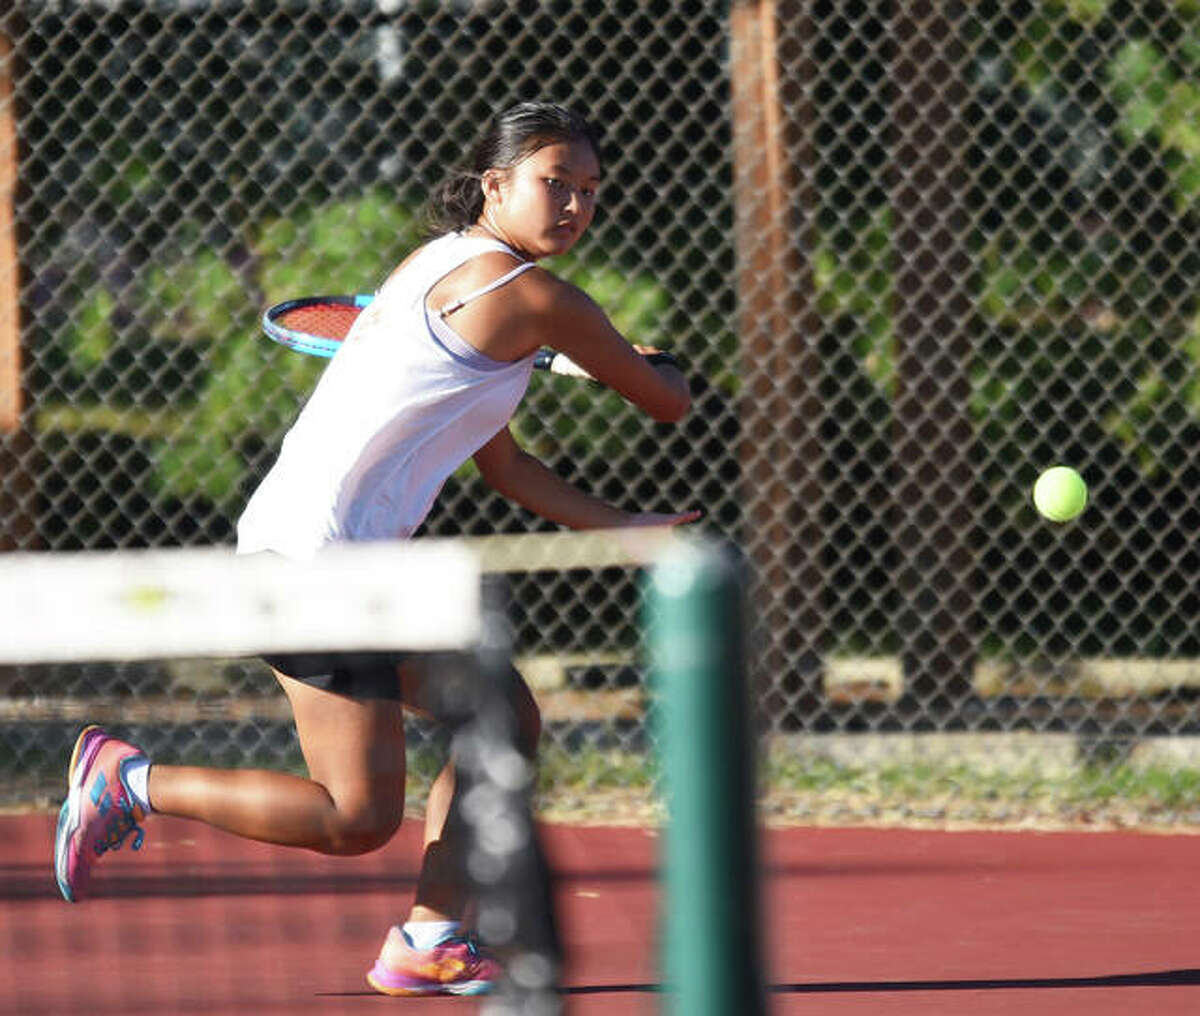 Edwardsville’s Chole Koons reaches for a shot during her singles match in the Edwardsville Sectional on Monday inside the EHS Tennis Center.